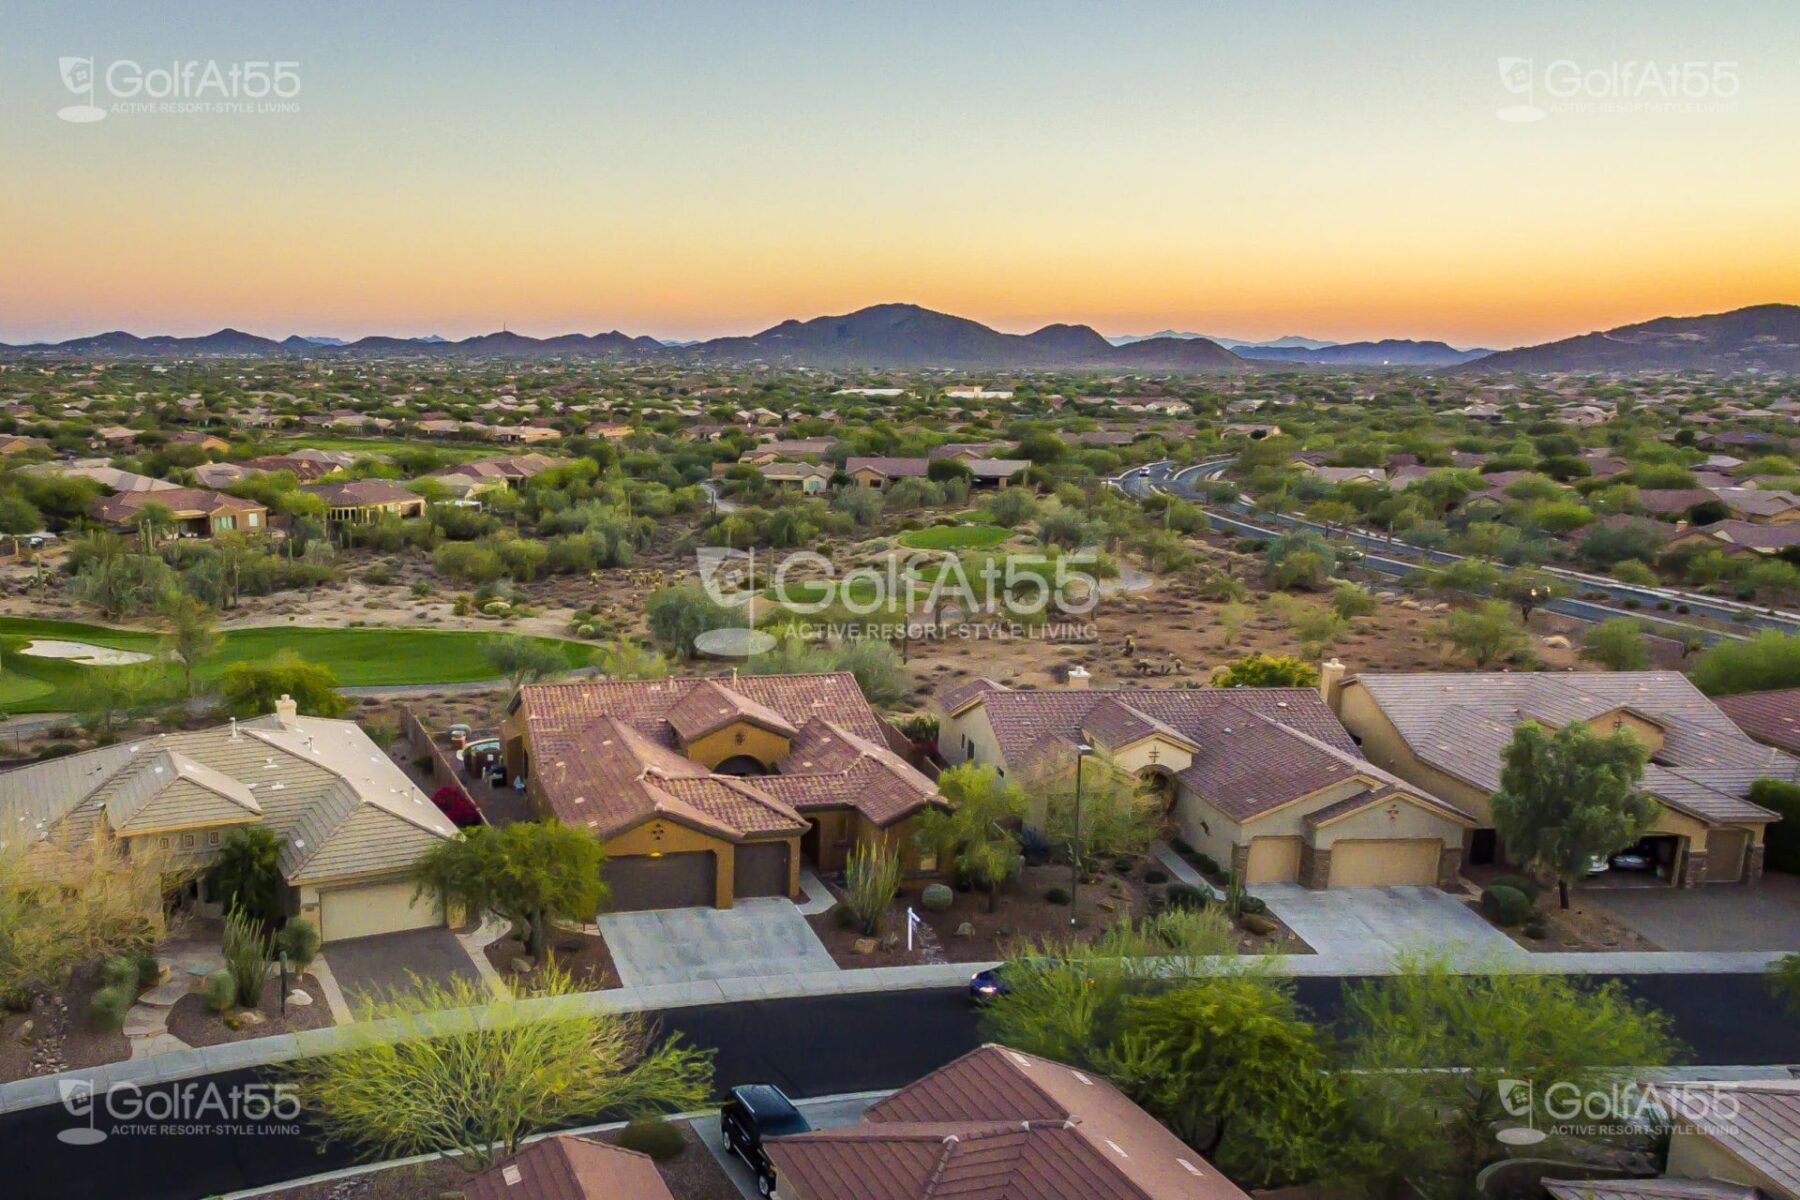 Anthem Country Club AZ | Homes for Sale & Real Estate | www.waldenwongart.com